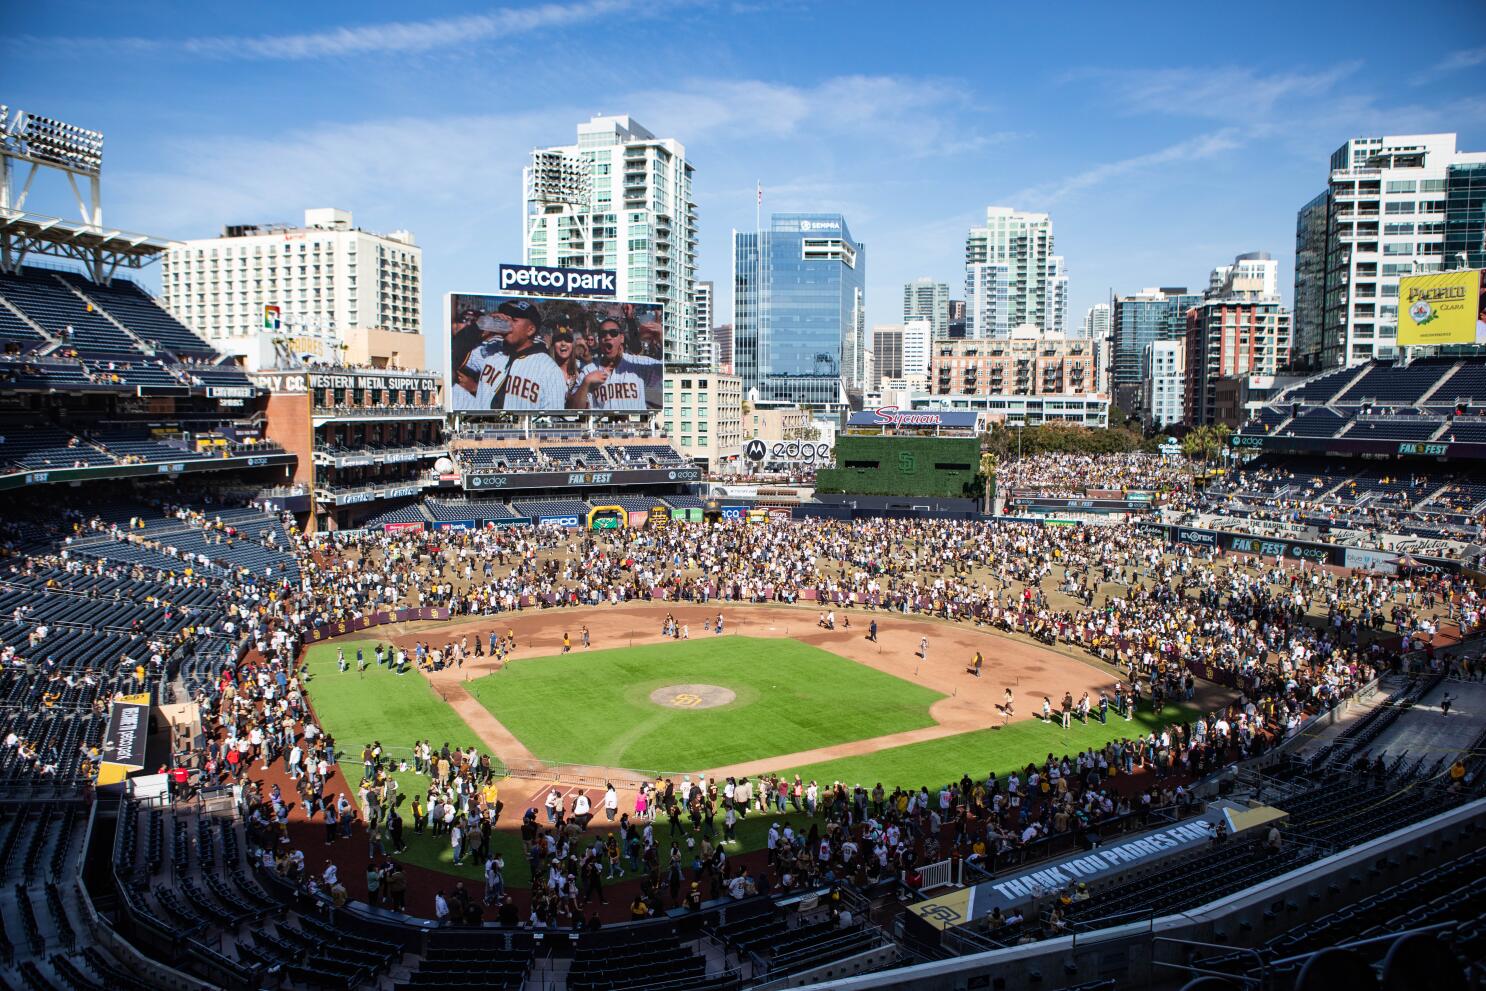 Padres FanFest a chance for fans to mingle and look behind the